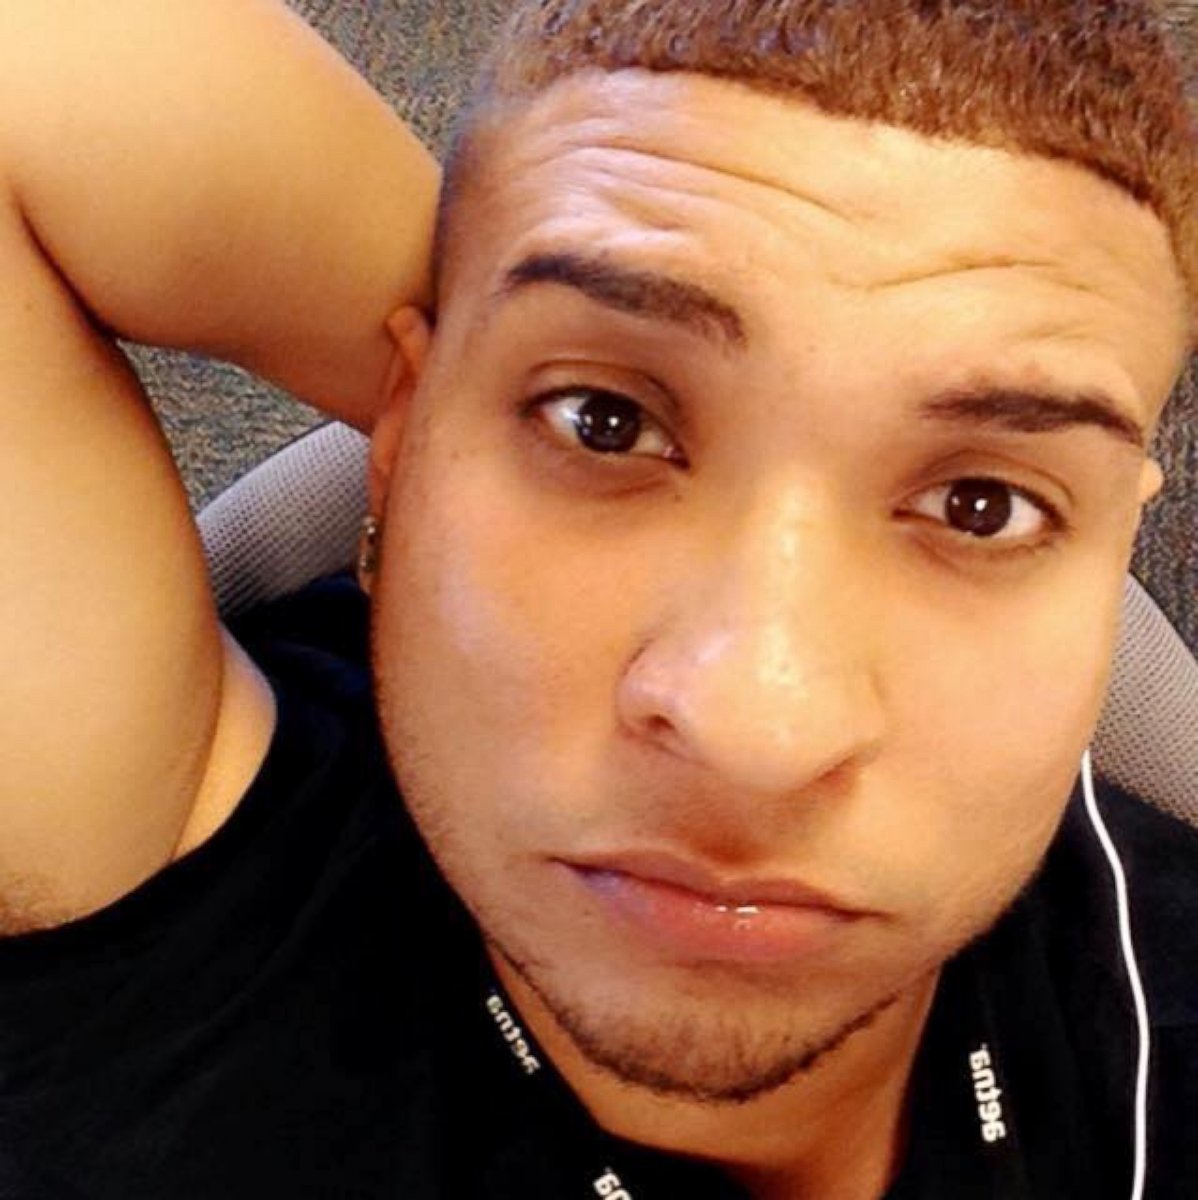 PHOTO: Pictured: Stanley Almodovar III, 23 